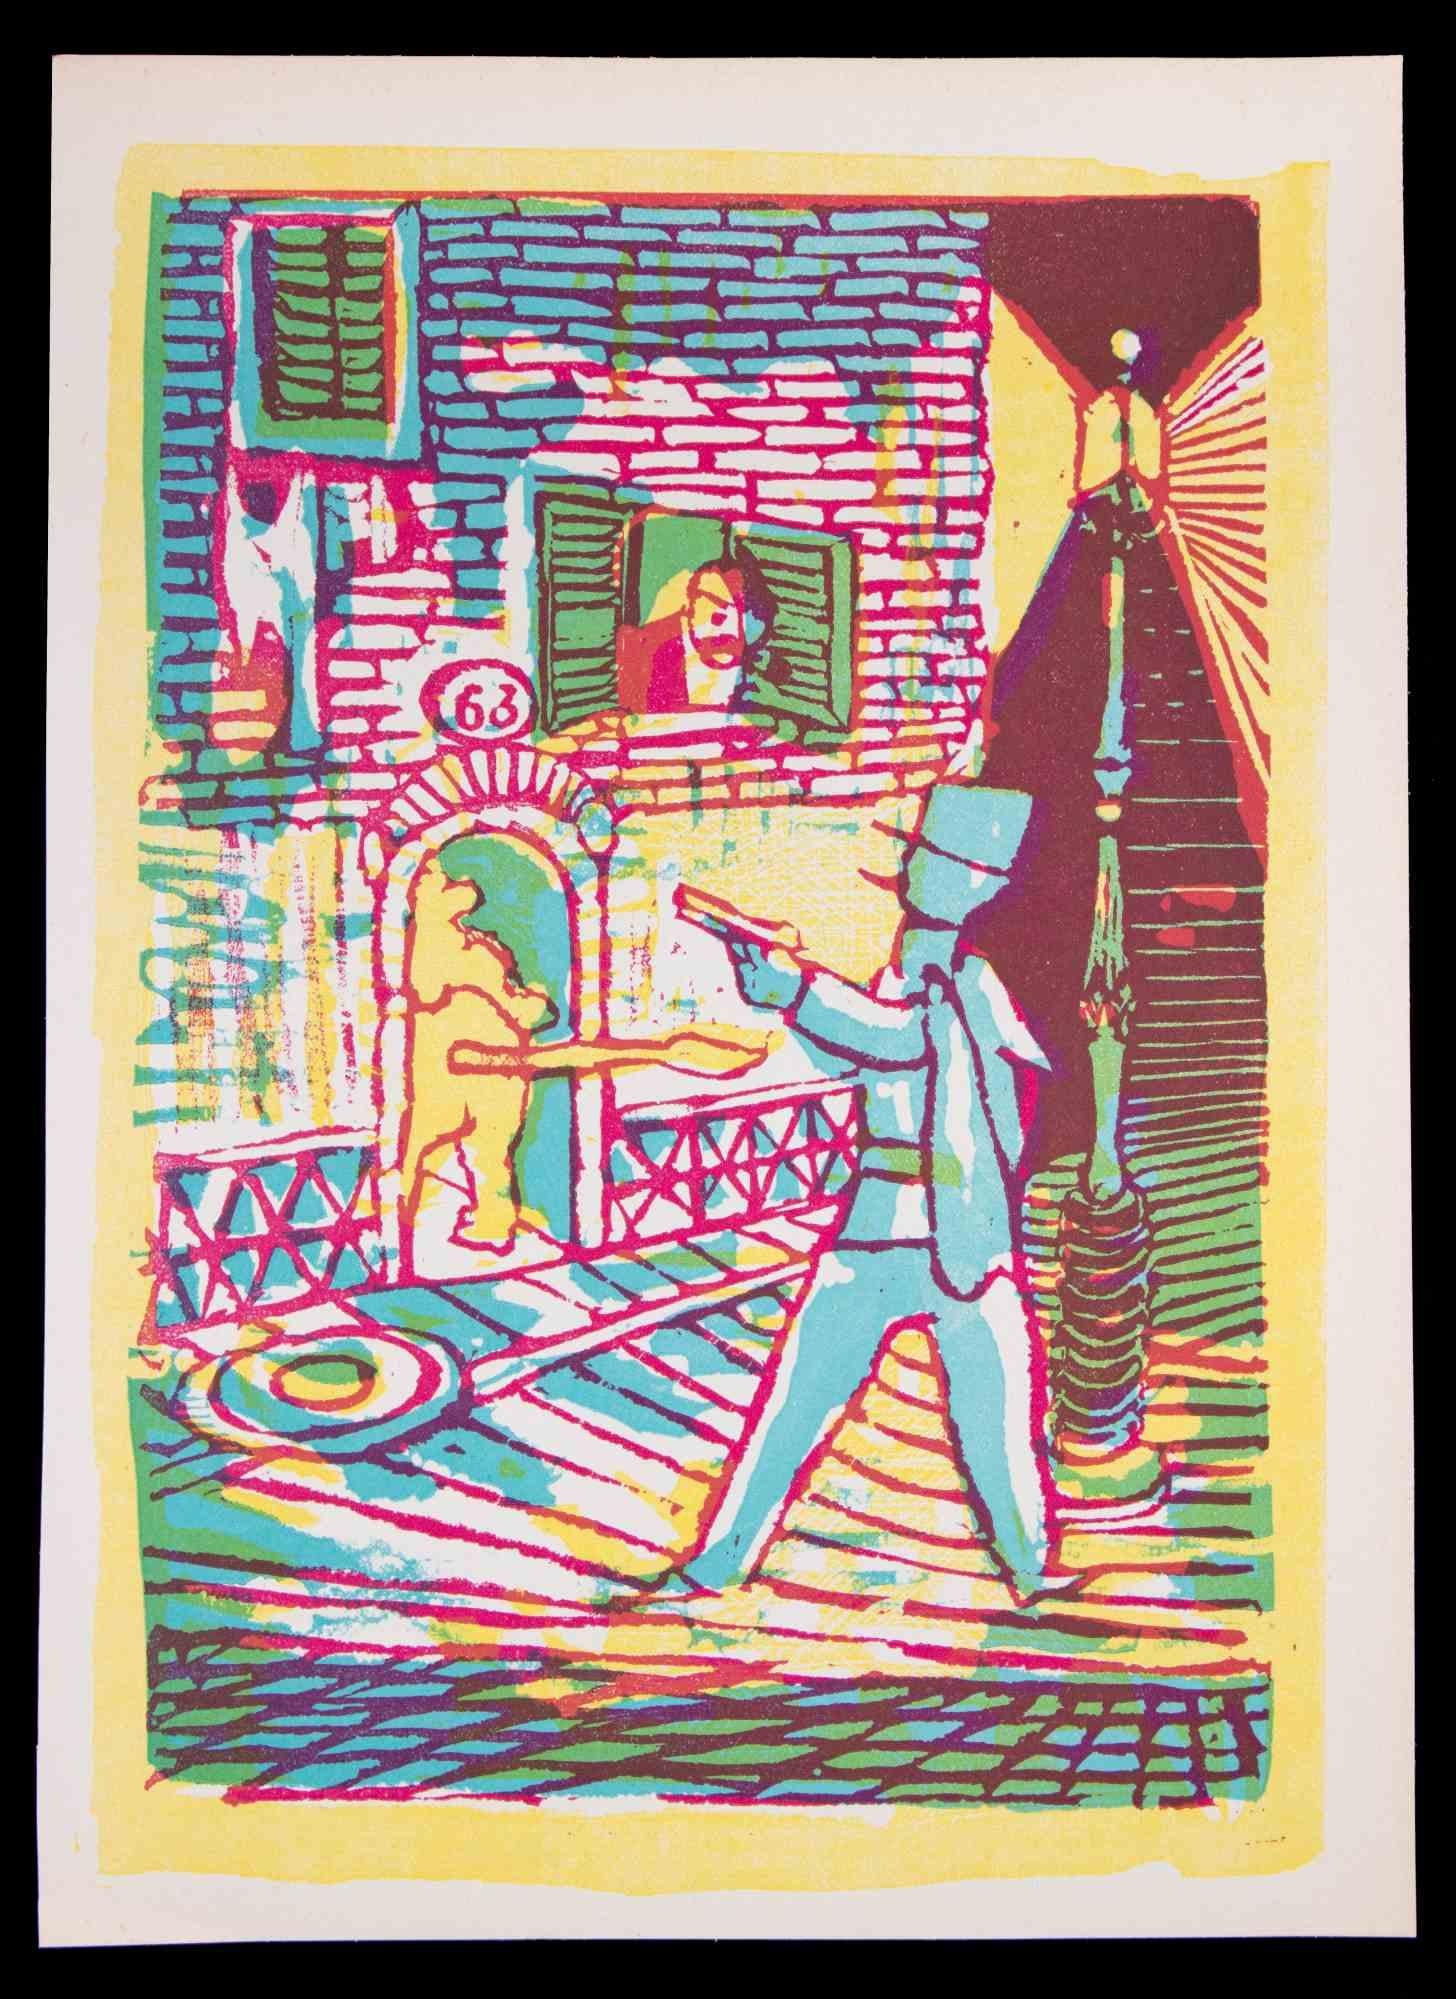 The Who is There is an Original Linocut Print realized by Mino Maccari in 1951.

Very good condition, not signed.

Mino Maccari (1898-1989) was an Italian writer, painter, engraver and journalist, winner the Feltrinelli Prize for painting on 1963.